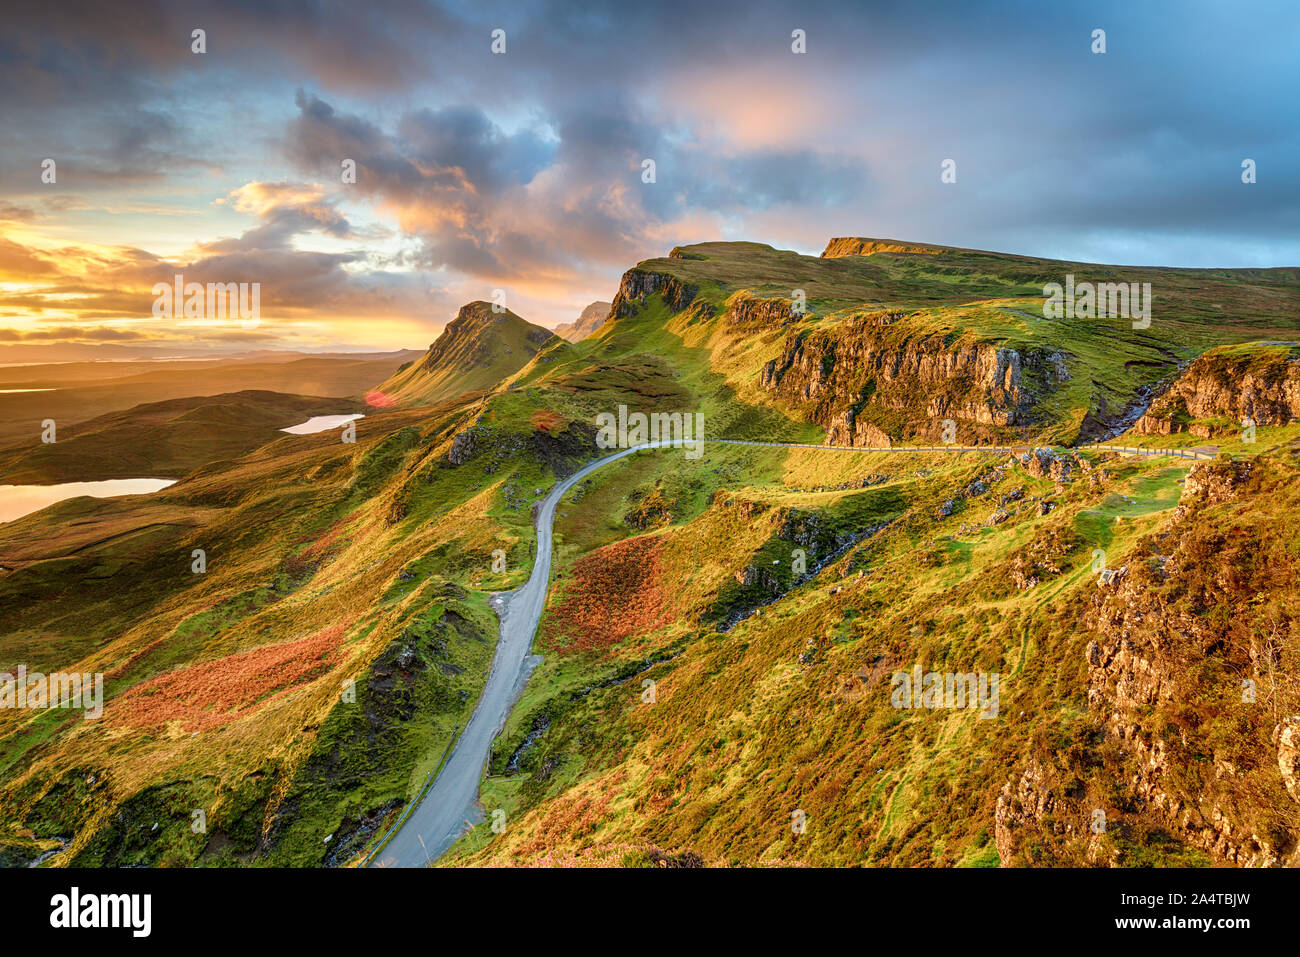 Dramatic sunrise sky over the Quiraing hills on the Trotternish peninsula on the Isle of Skye in the Highlands of Scotland Stock Photo